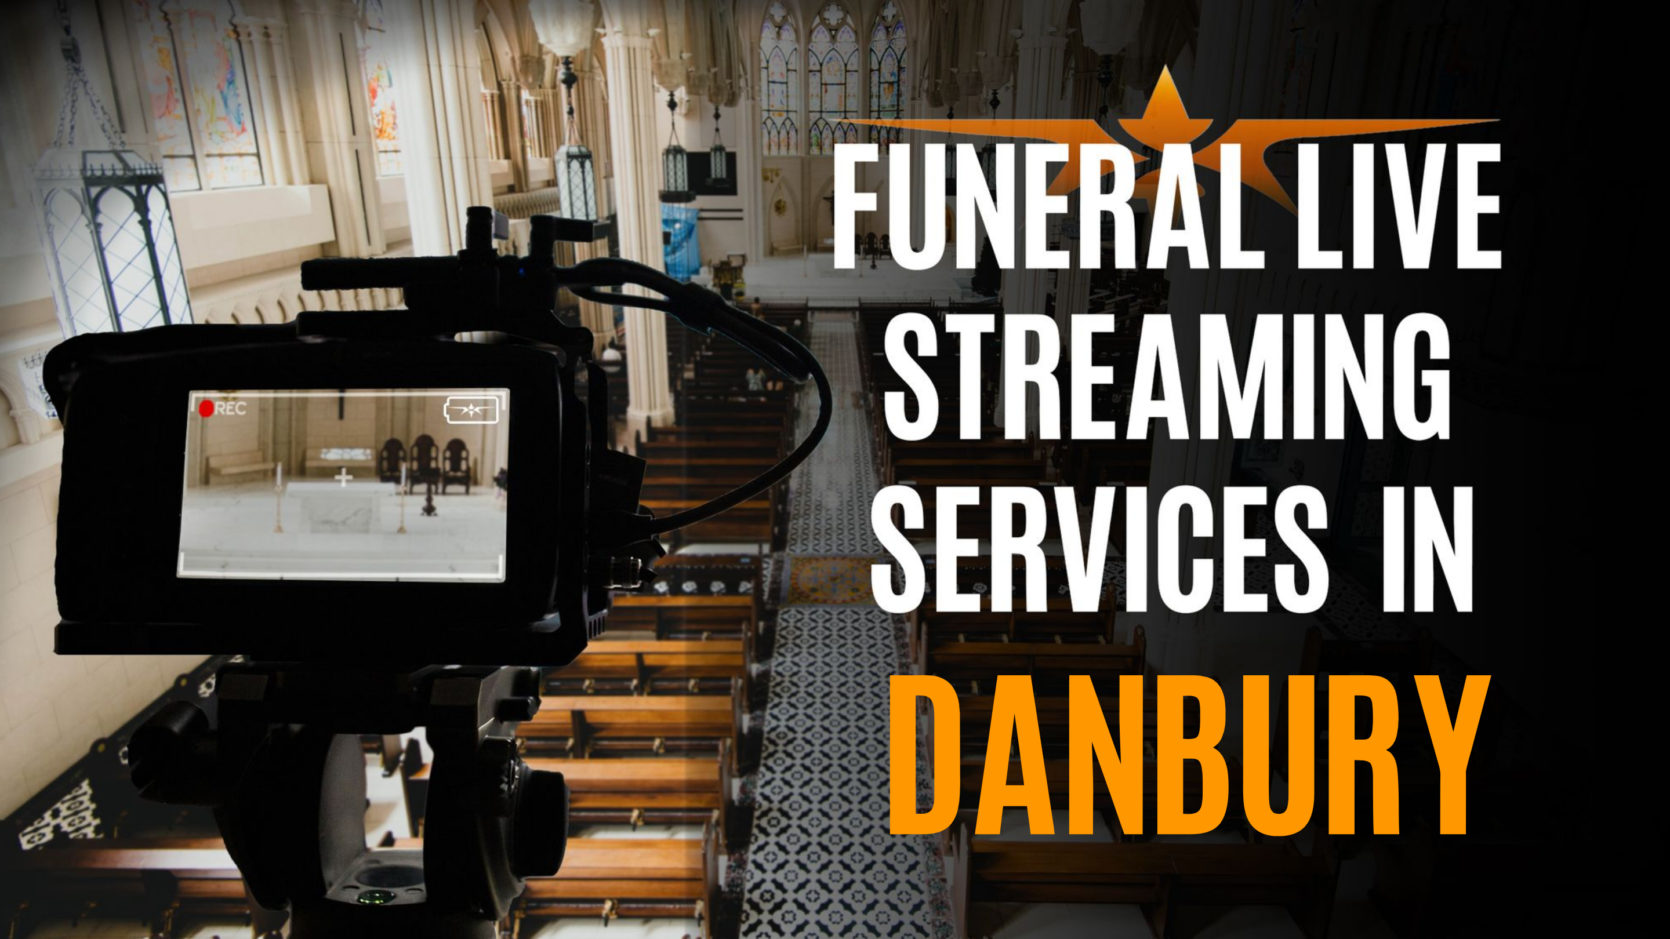 Funeral Live Streaming Services in Danbury